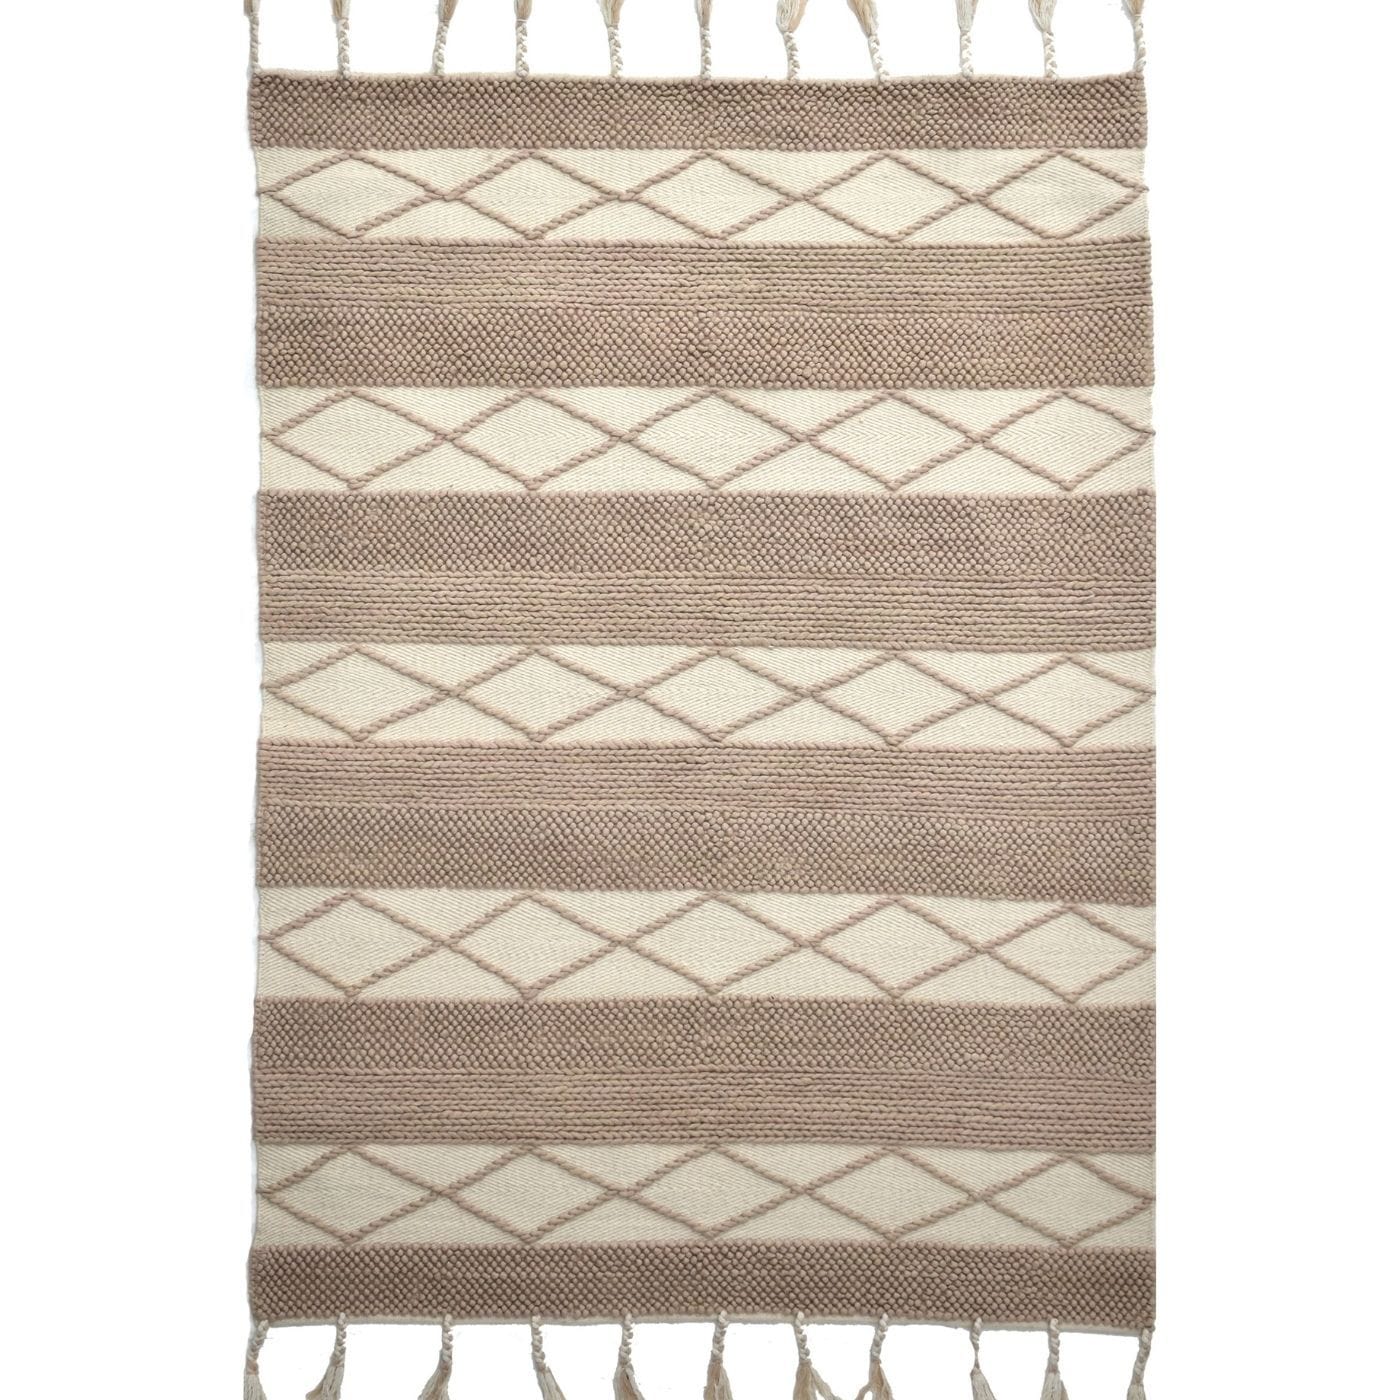 Clementine Woven Wool 6X9 Rug